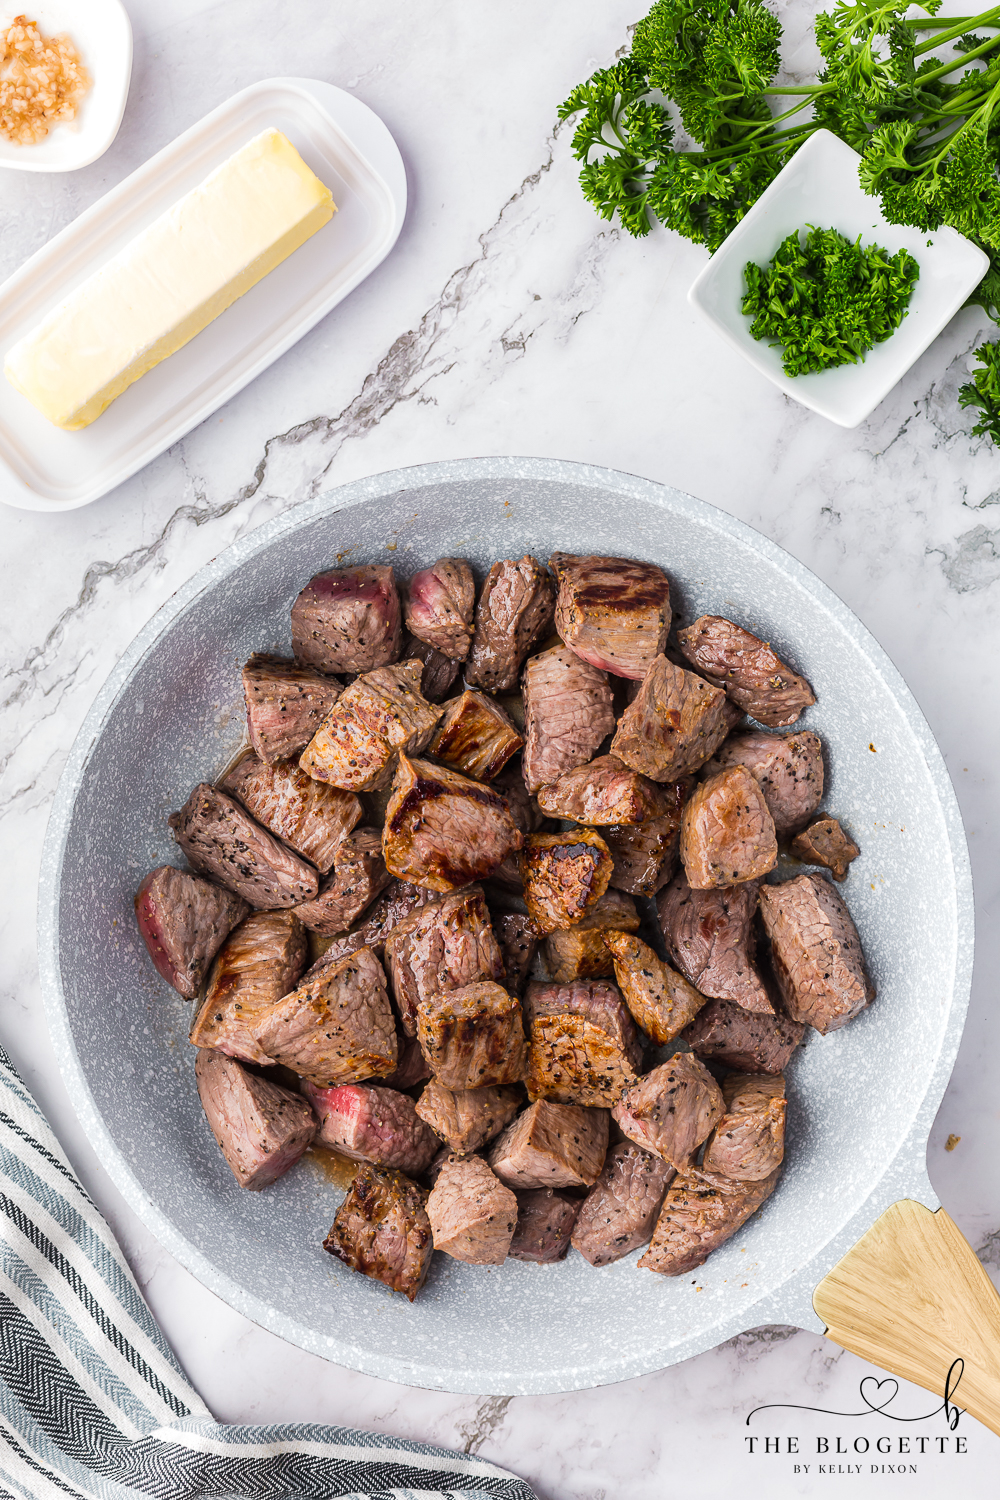 How to cook steak cubes